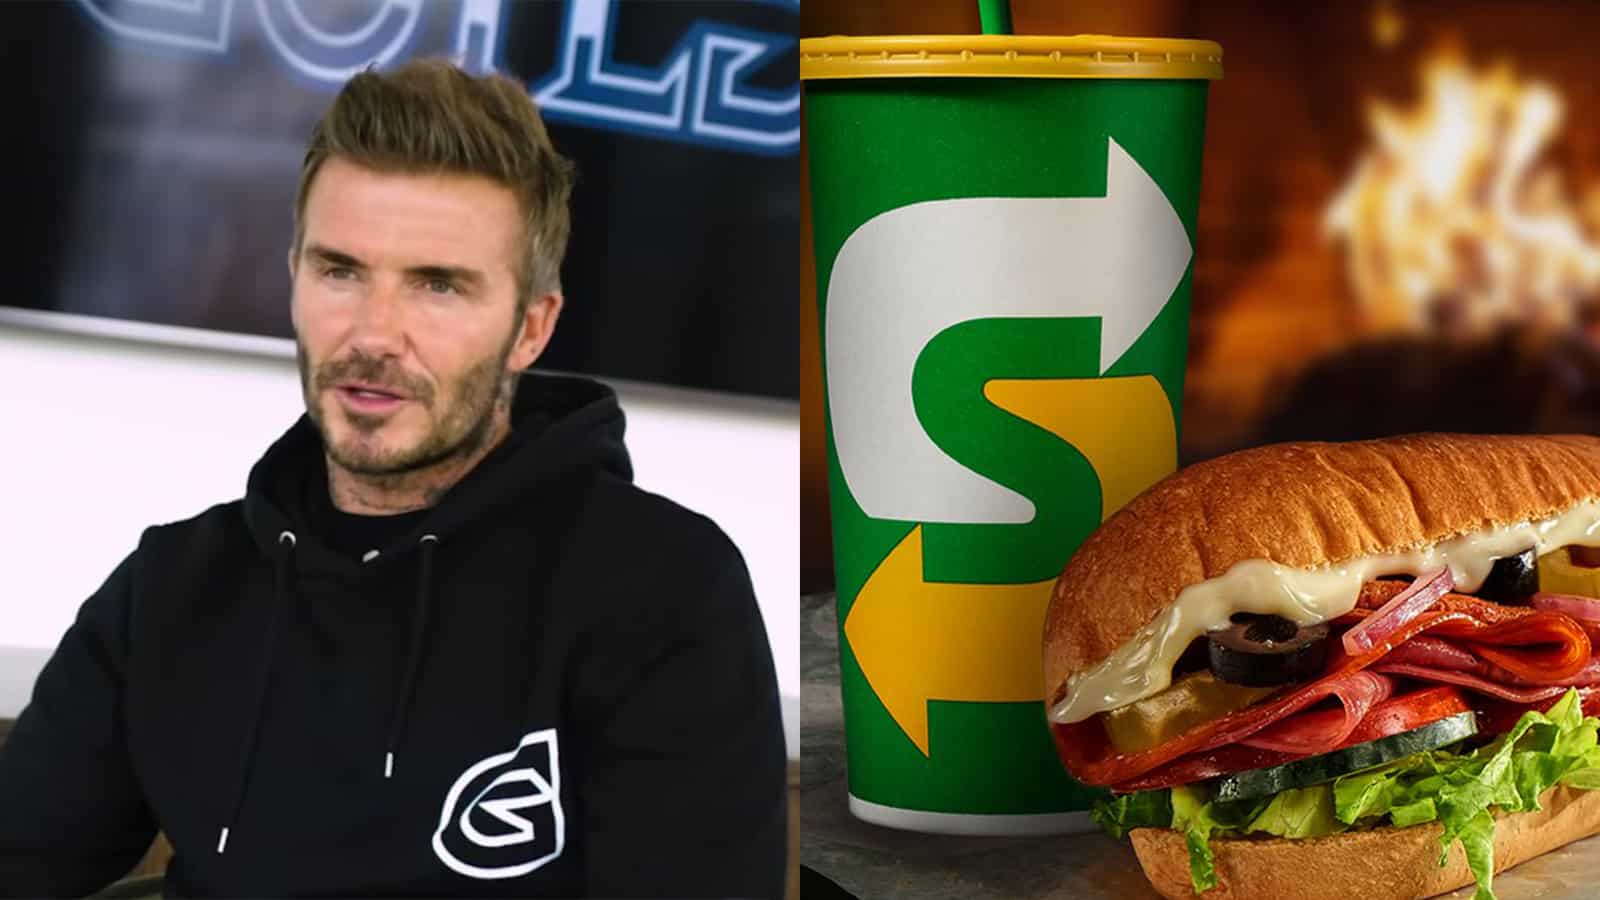 David Beckham, a self-proclaimed sandwich lover, is also a co-owner of Guild Esports